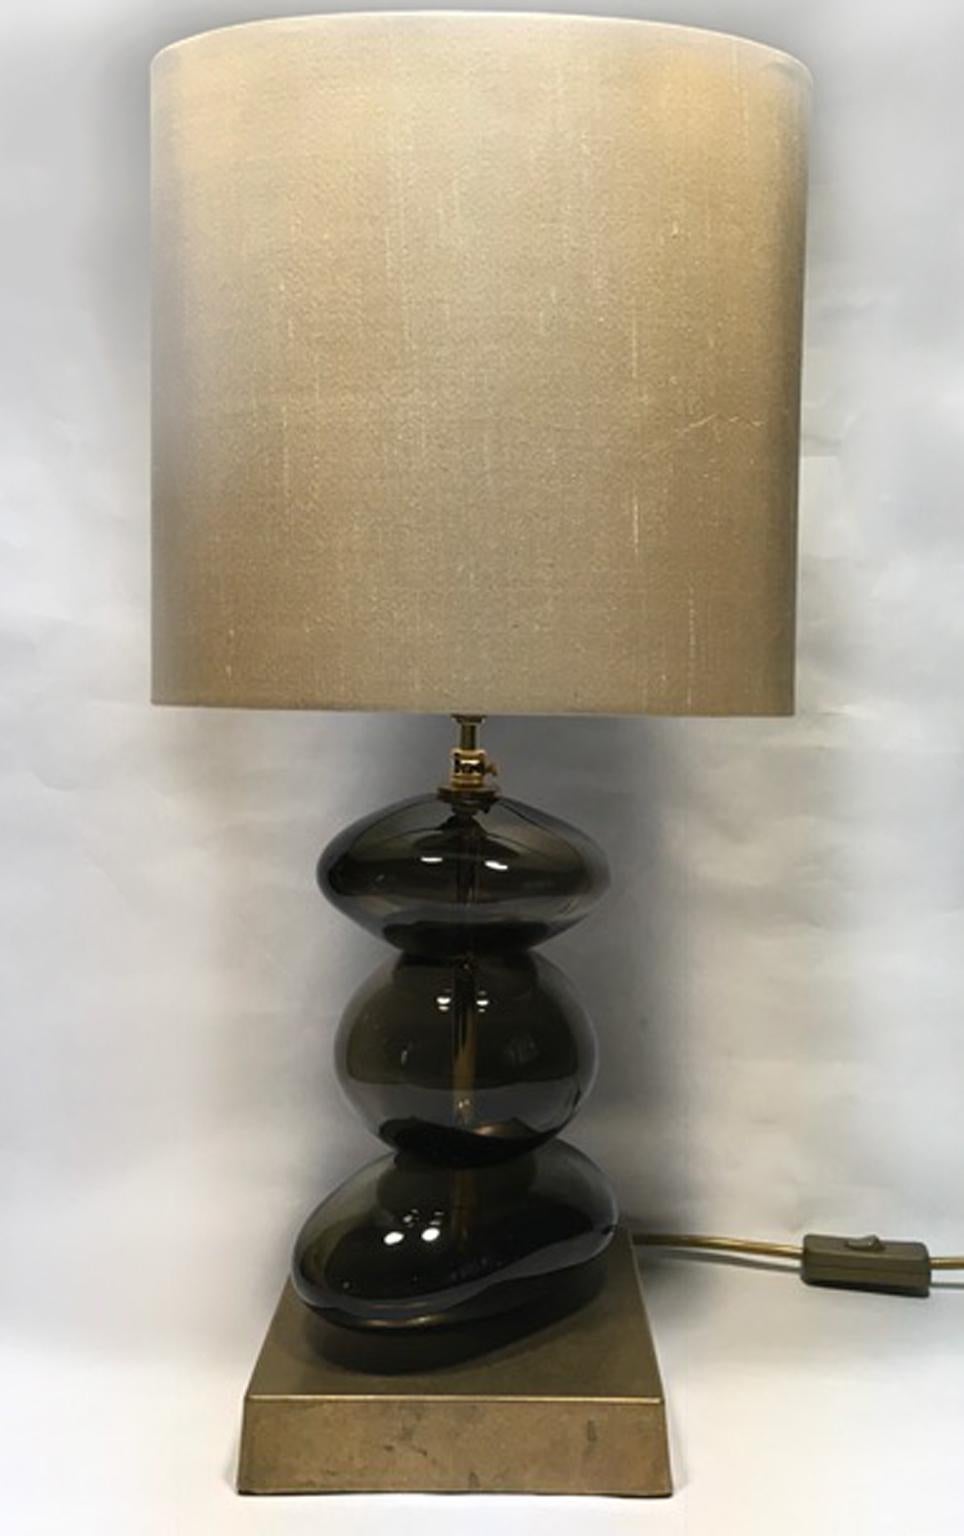 This is a bronze color blown glass table lamp with pure silk hand made lampshade, of contemporary production.
It is a beautiful eye catching object, a piece of art for its elegant presence and for the organic shape of the handcrafted body glass.
The